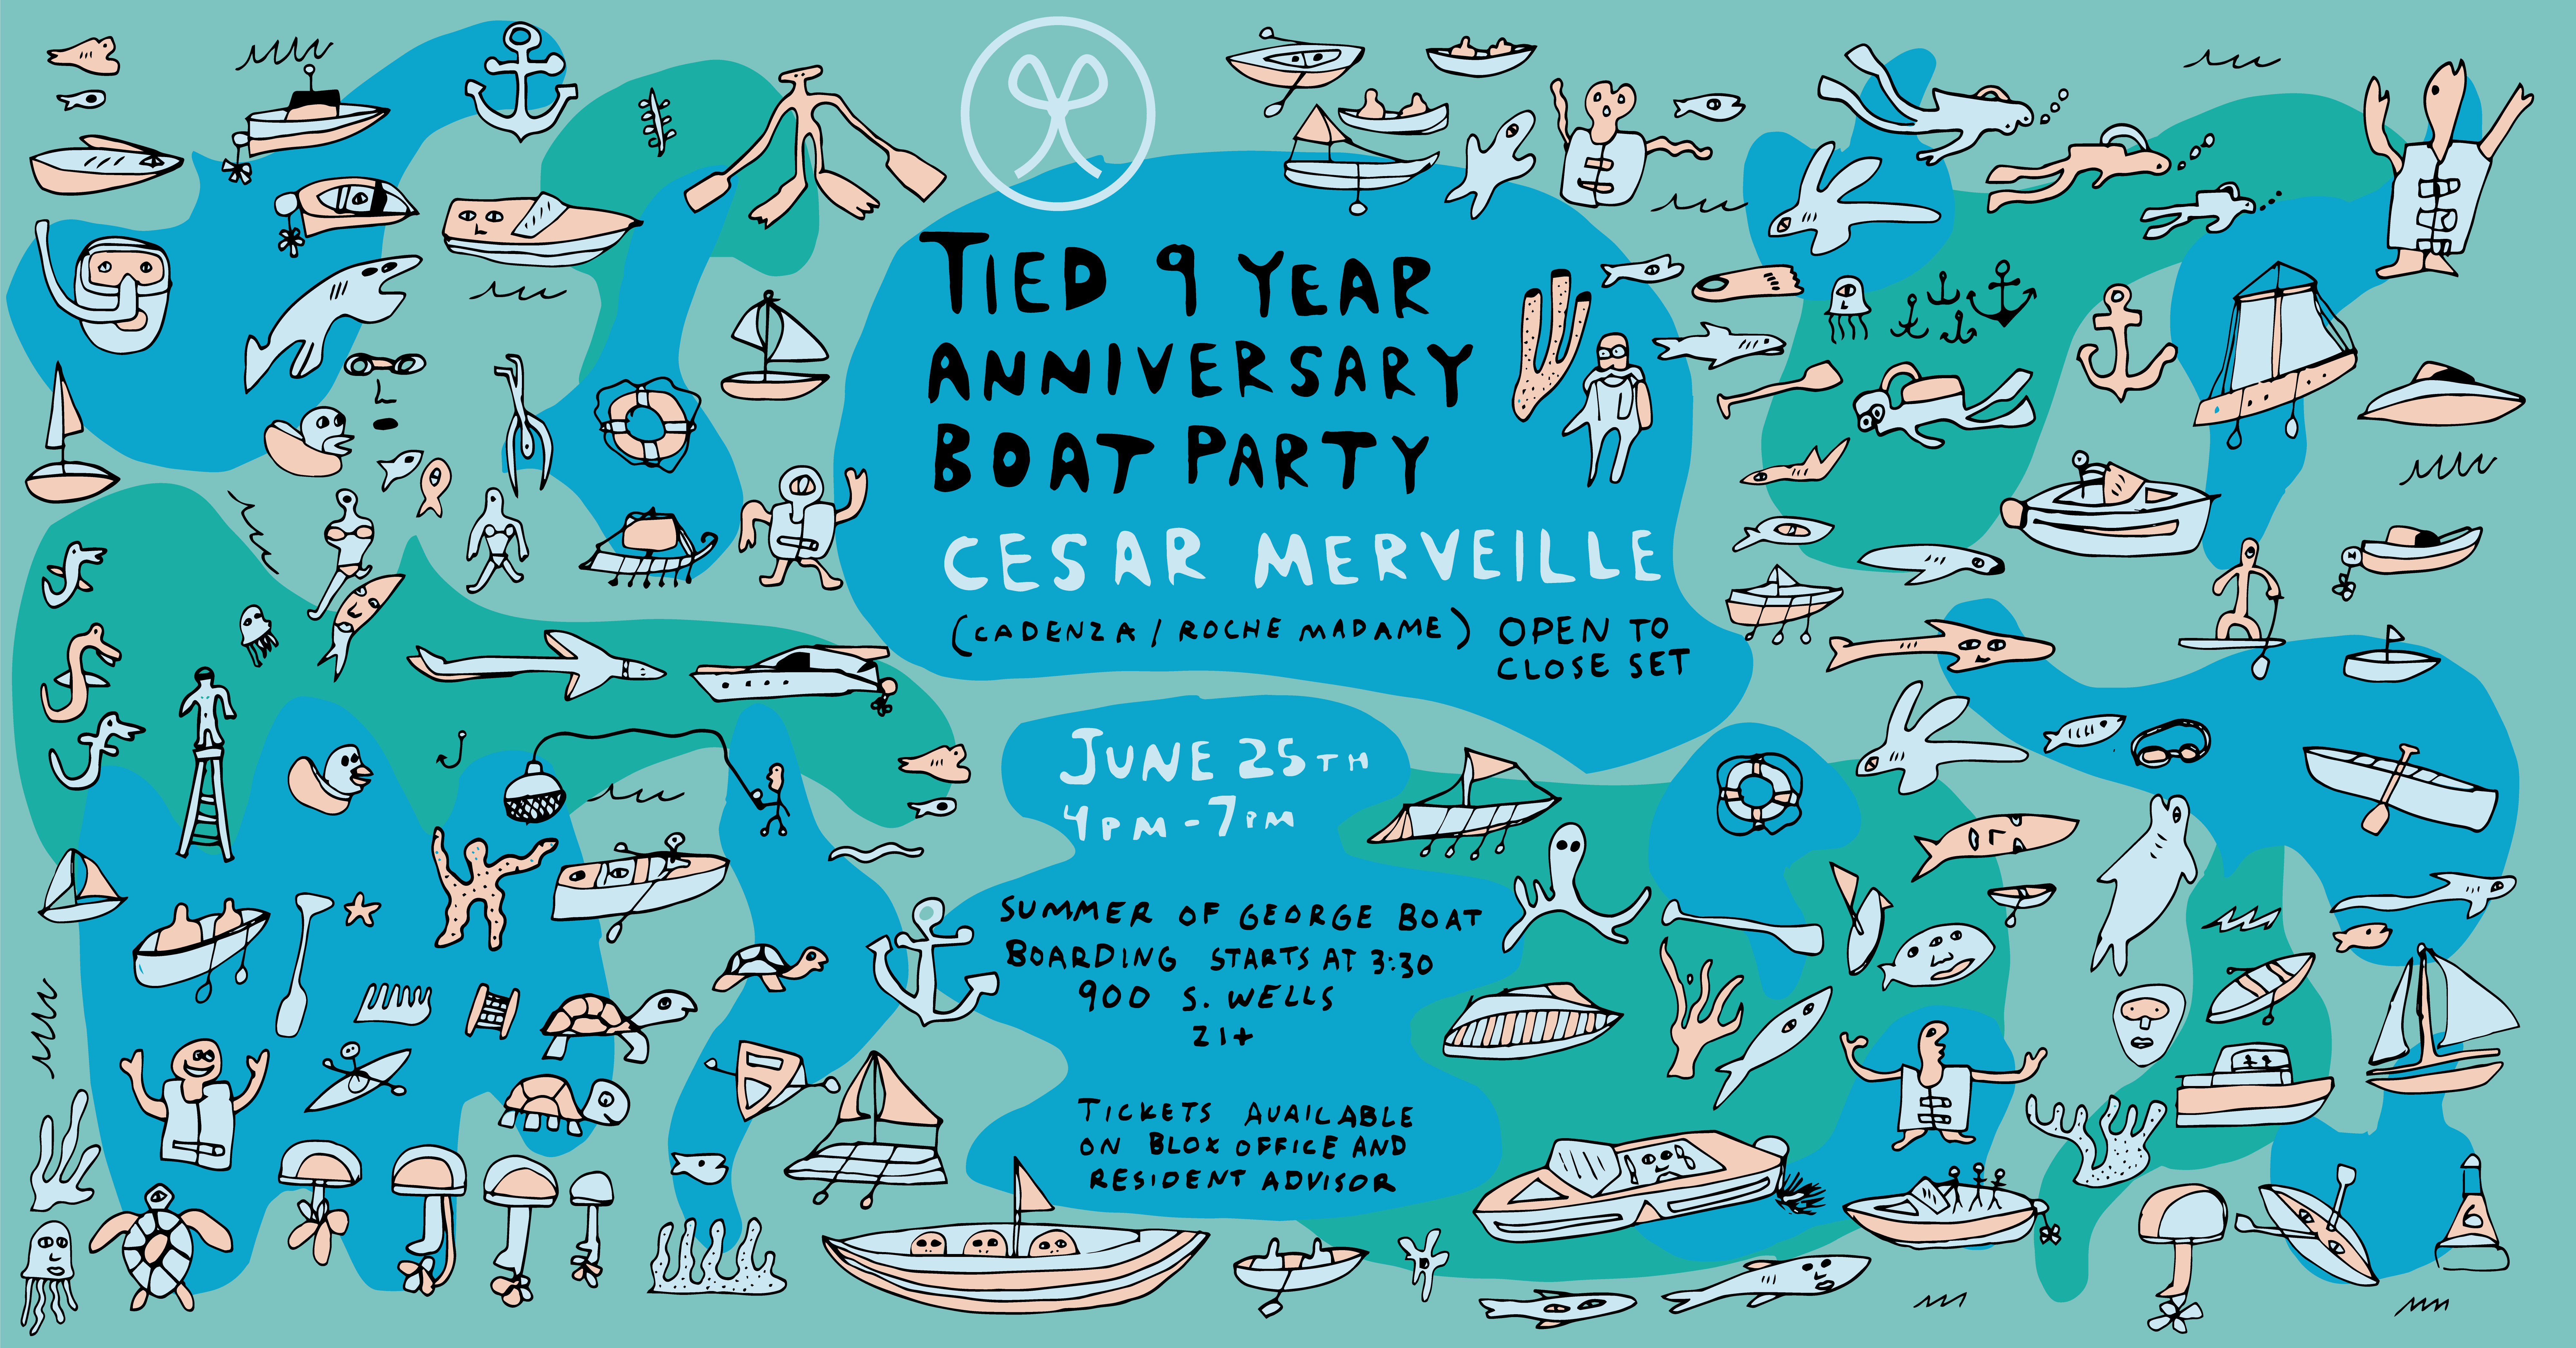 Tied 9 Year Anniversary Boat Party with Cesar Merveille - Página frontal